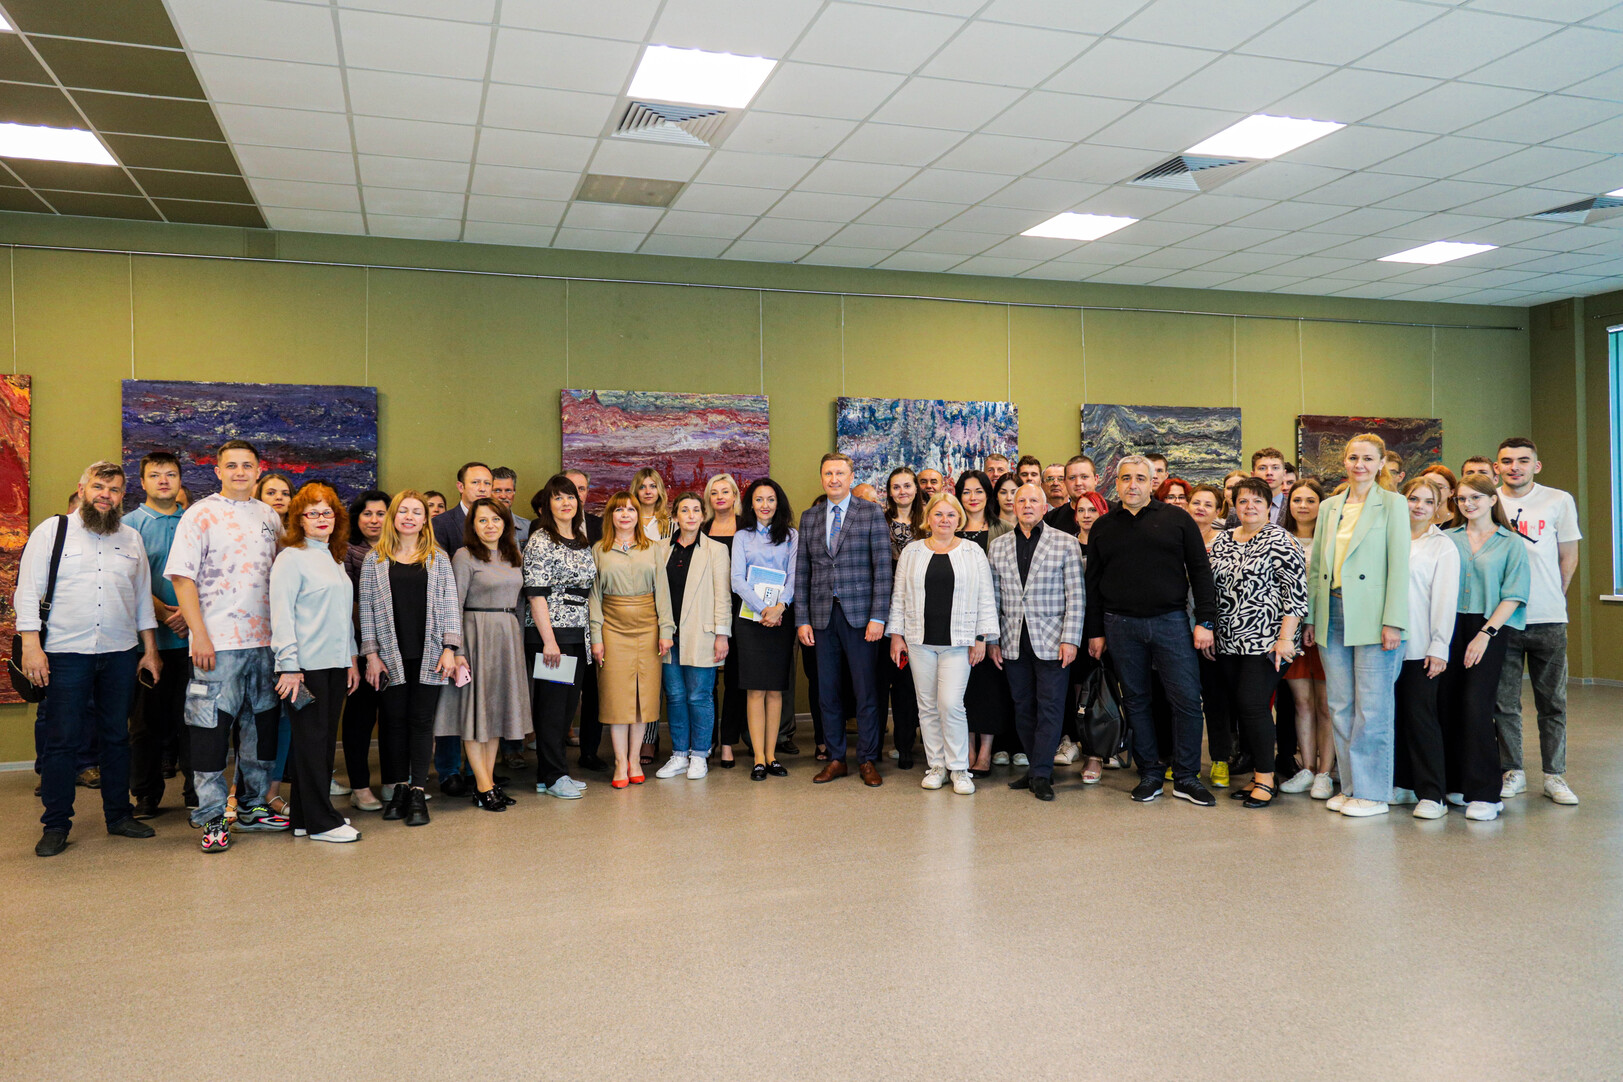 Finissage of Max Vityk's charitable art project "History of Planet Earth" is held at the Poltava Polytechnic